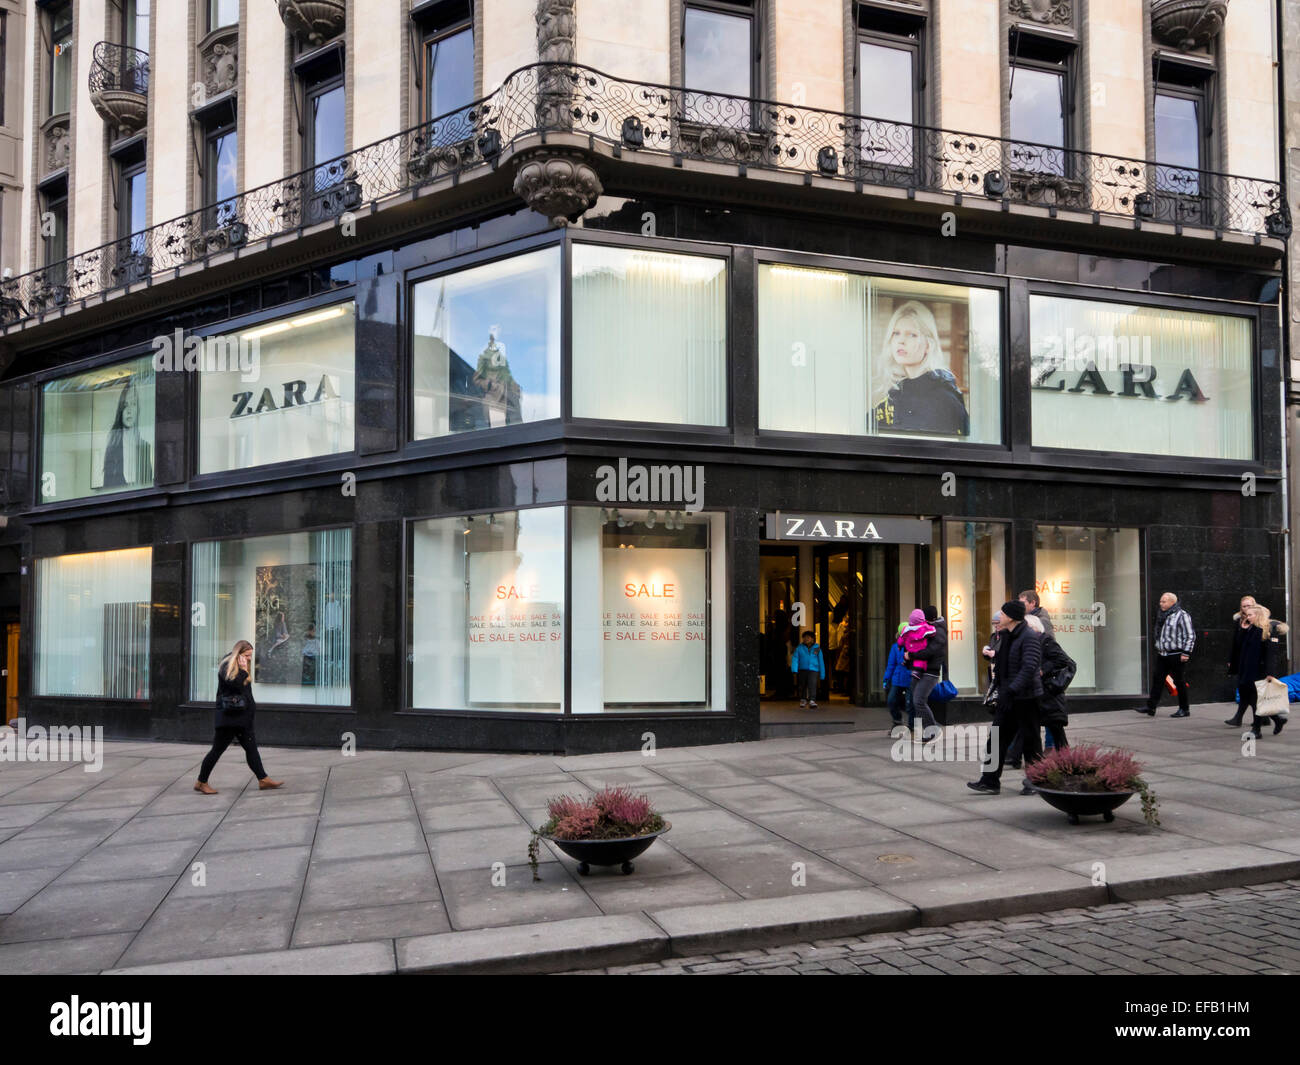 Norwegian Brand Shop High Resolution Stock Photography and Images - Alamy